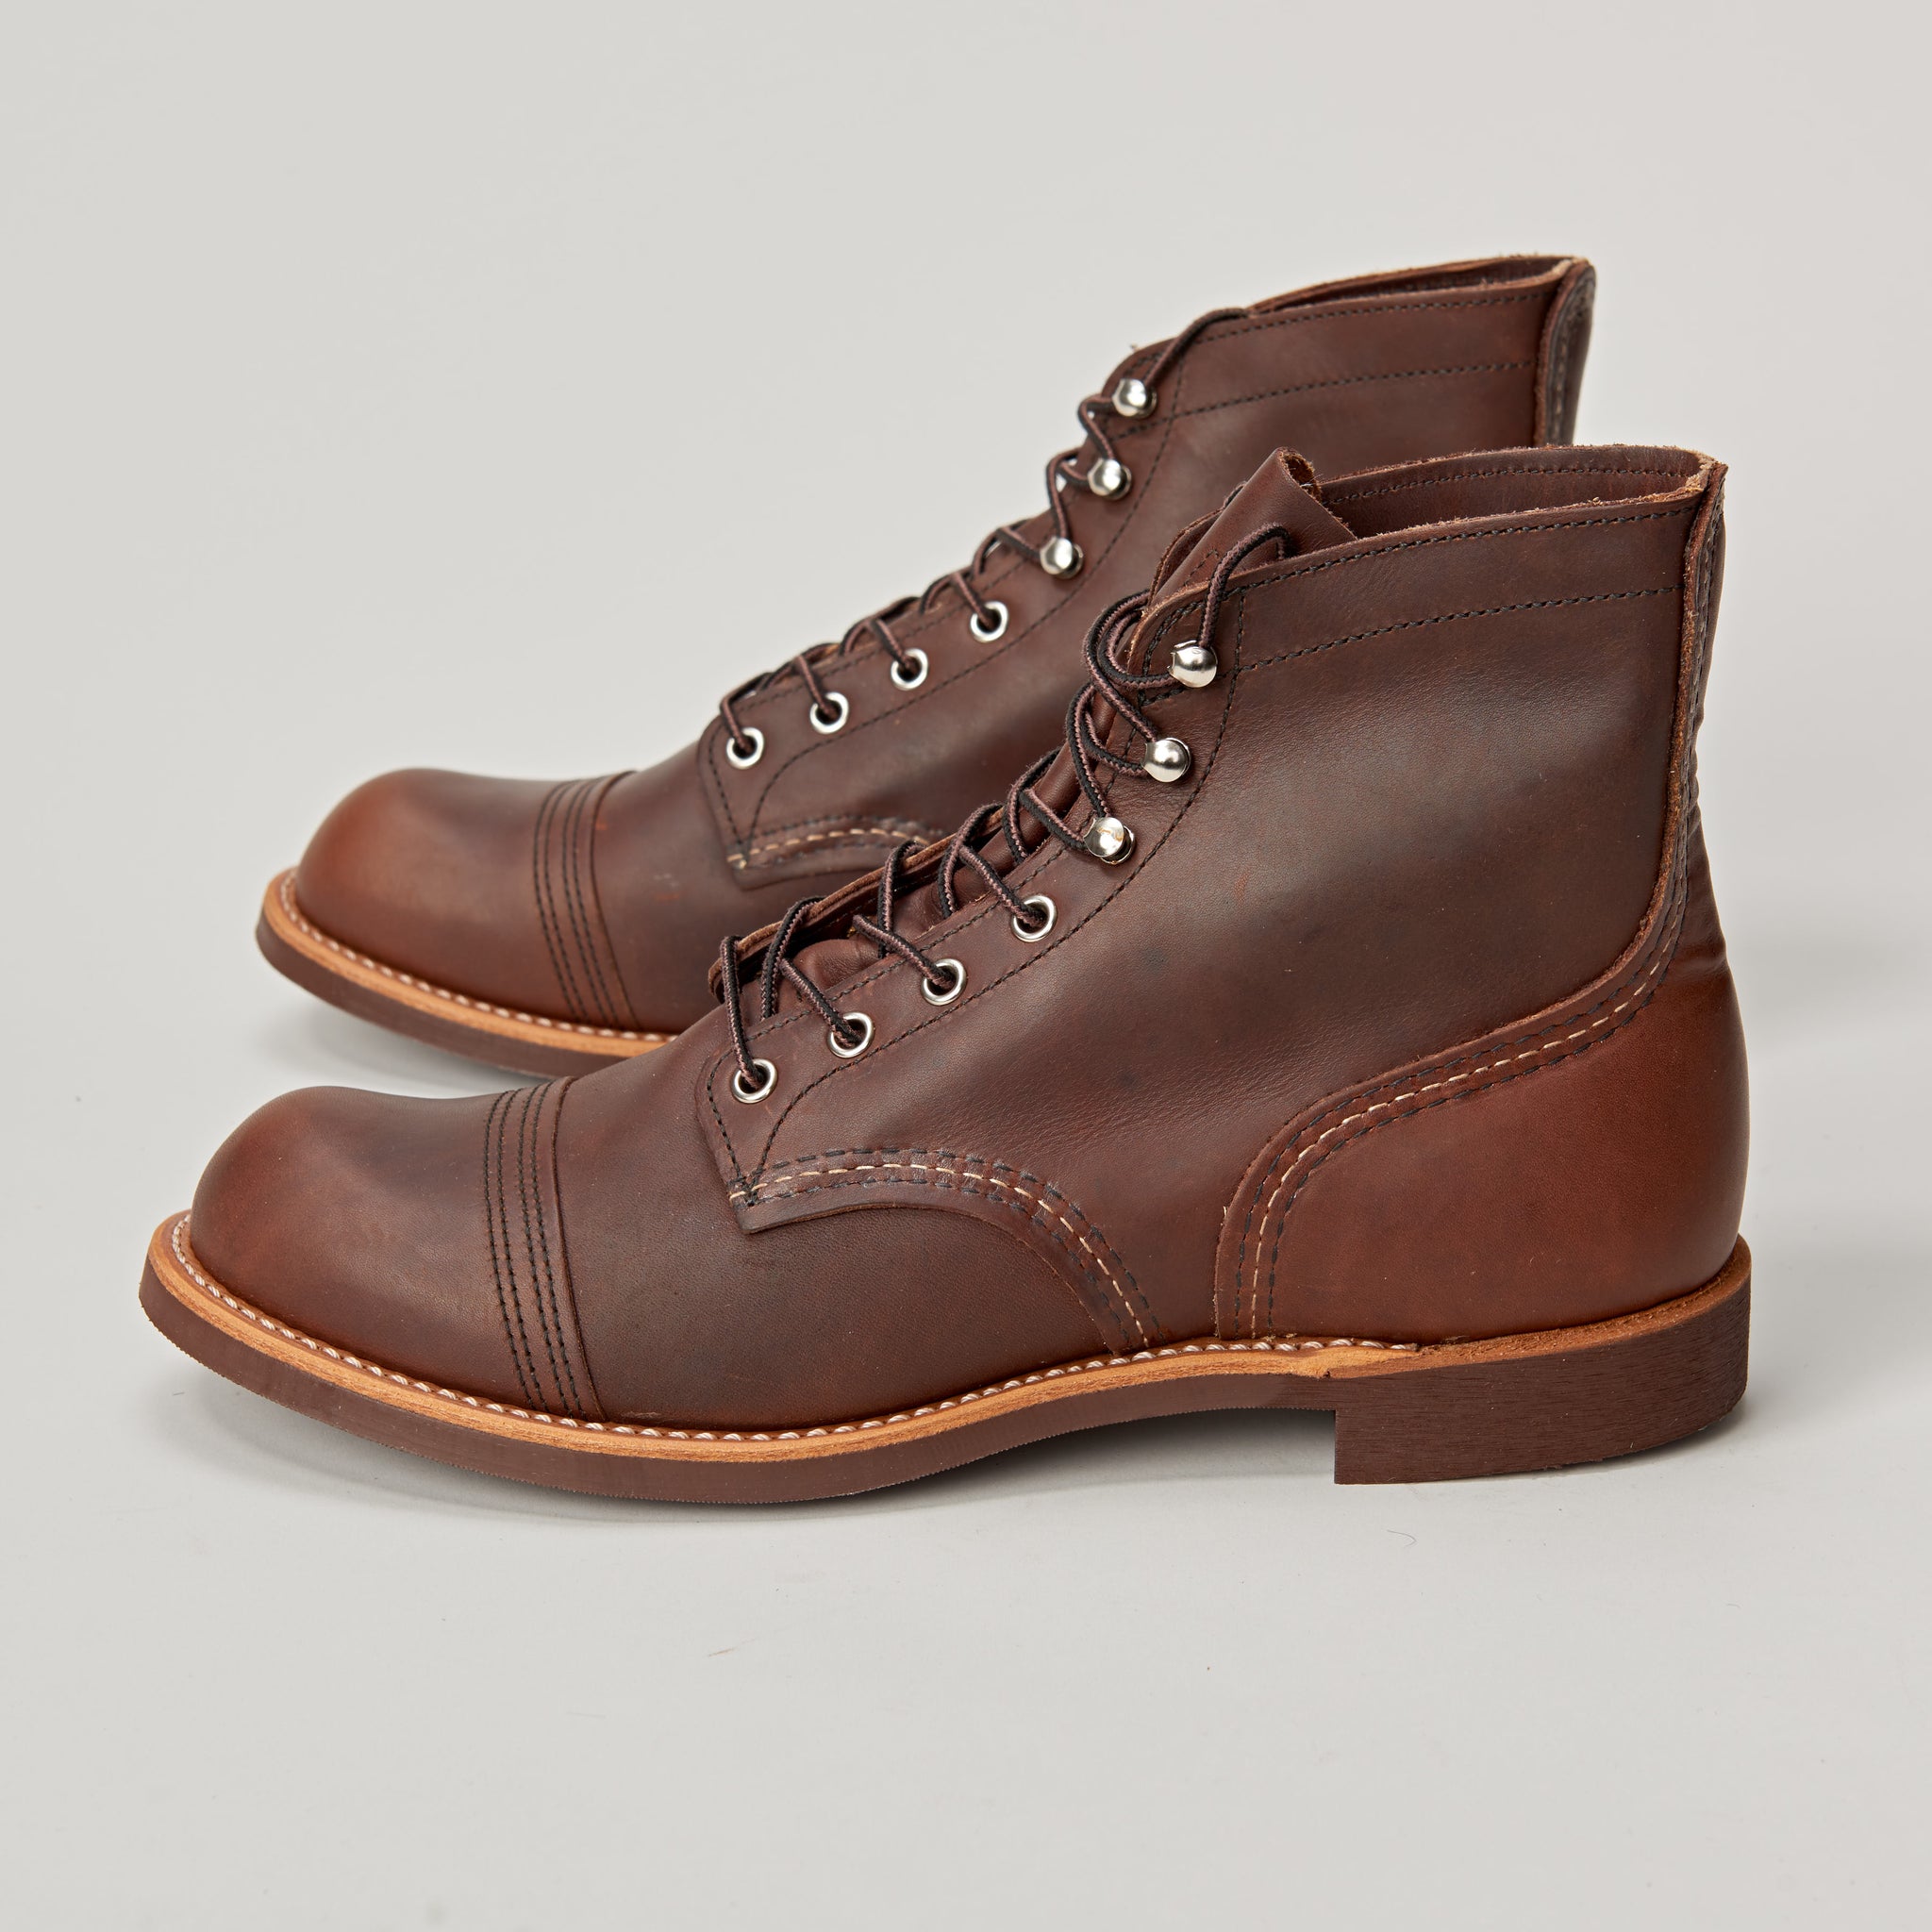 RED WING IRON RANGER 8111 - AMBER HARNESS – Pickings and Parry